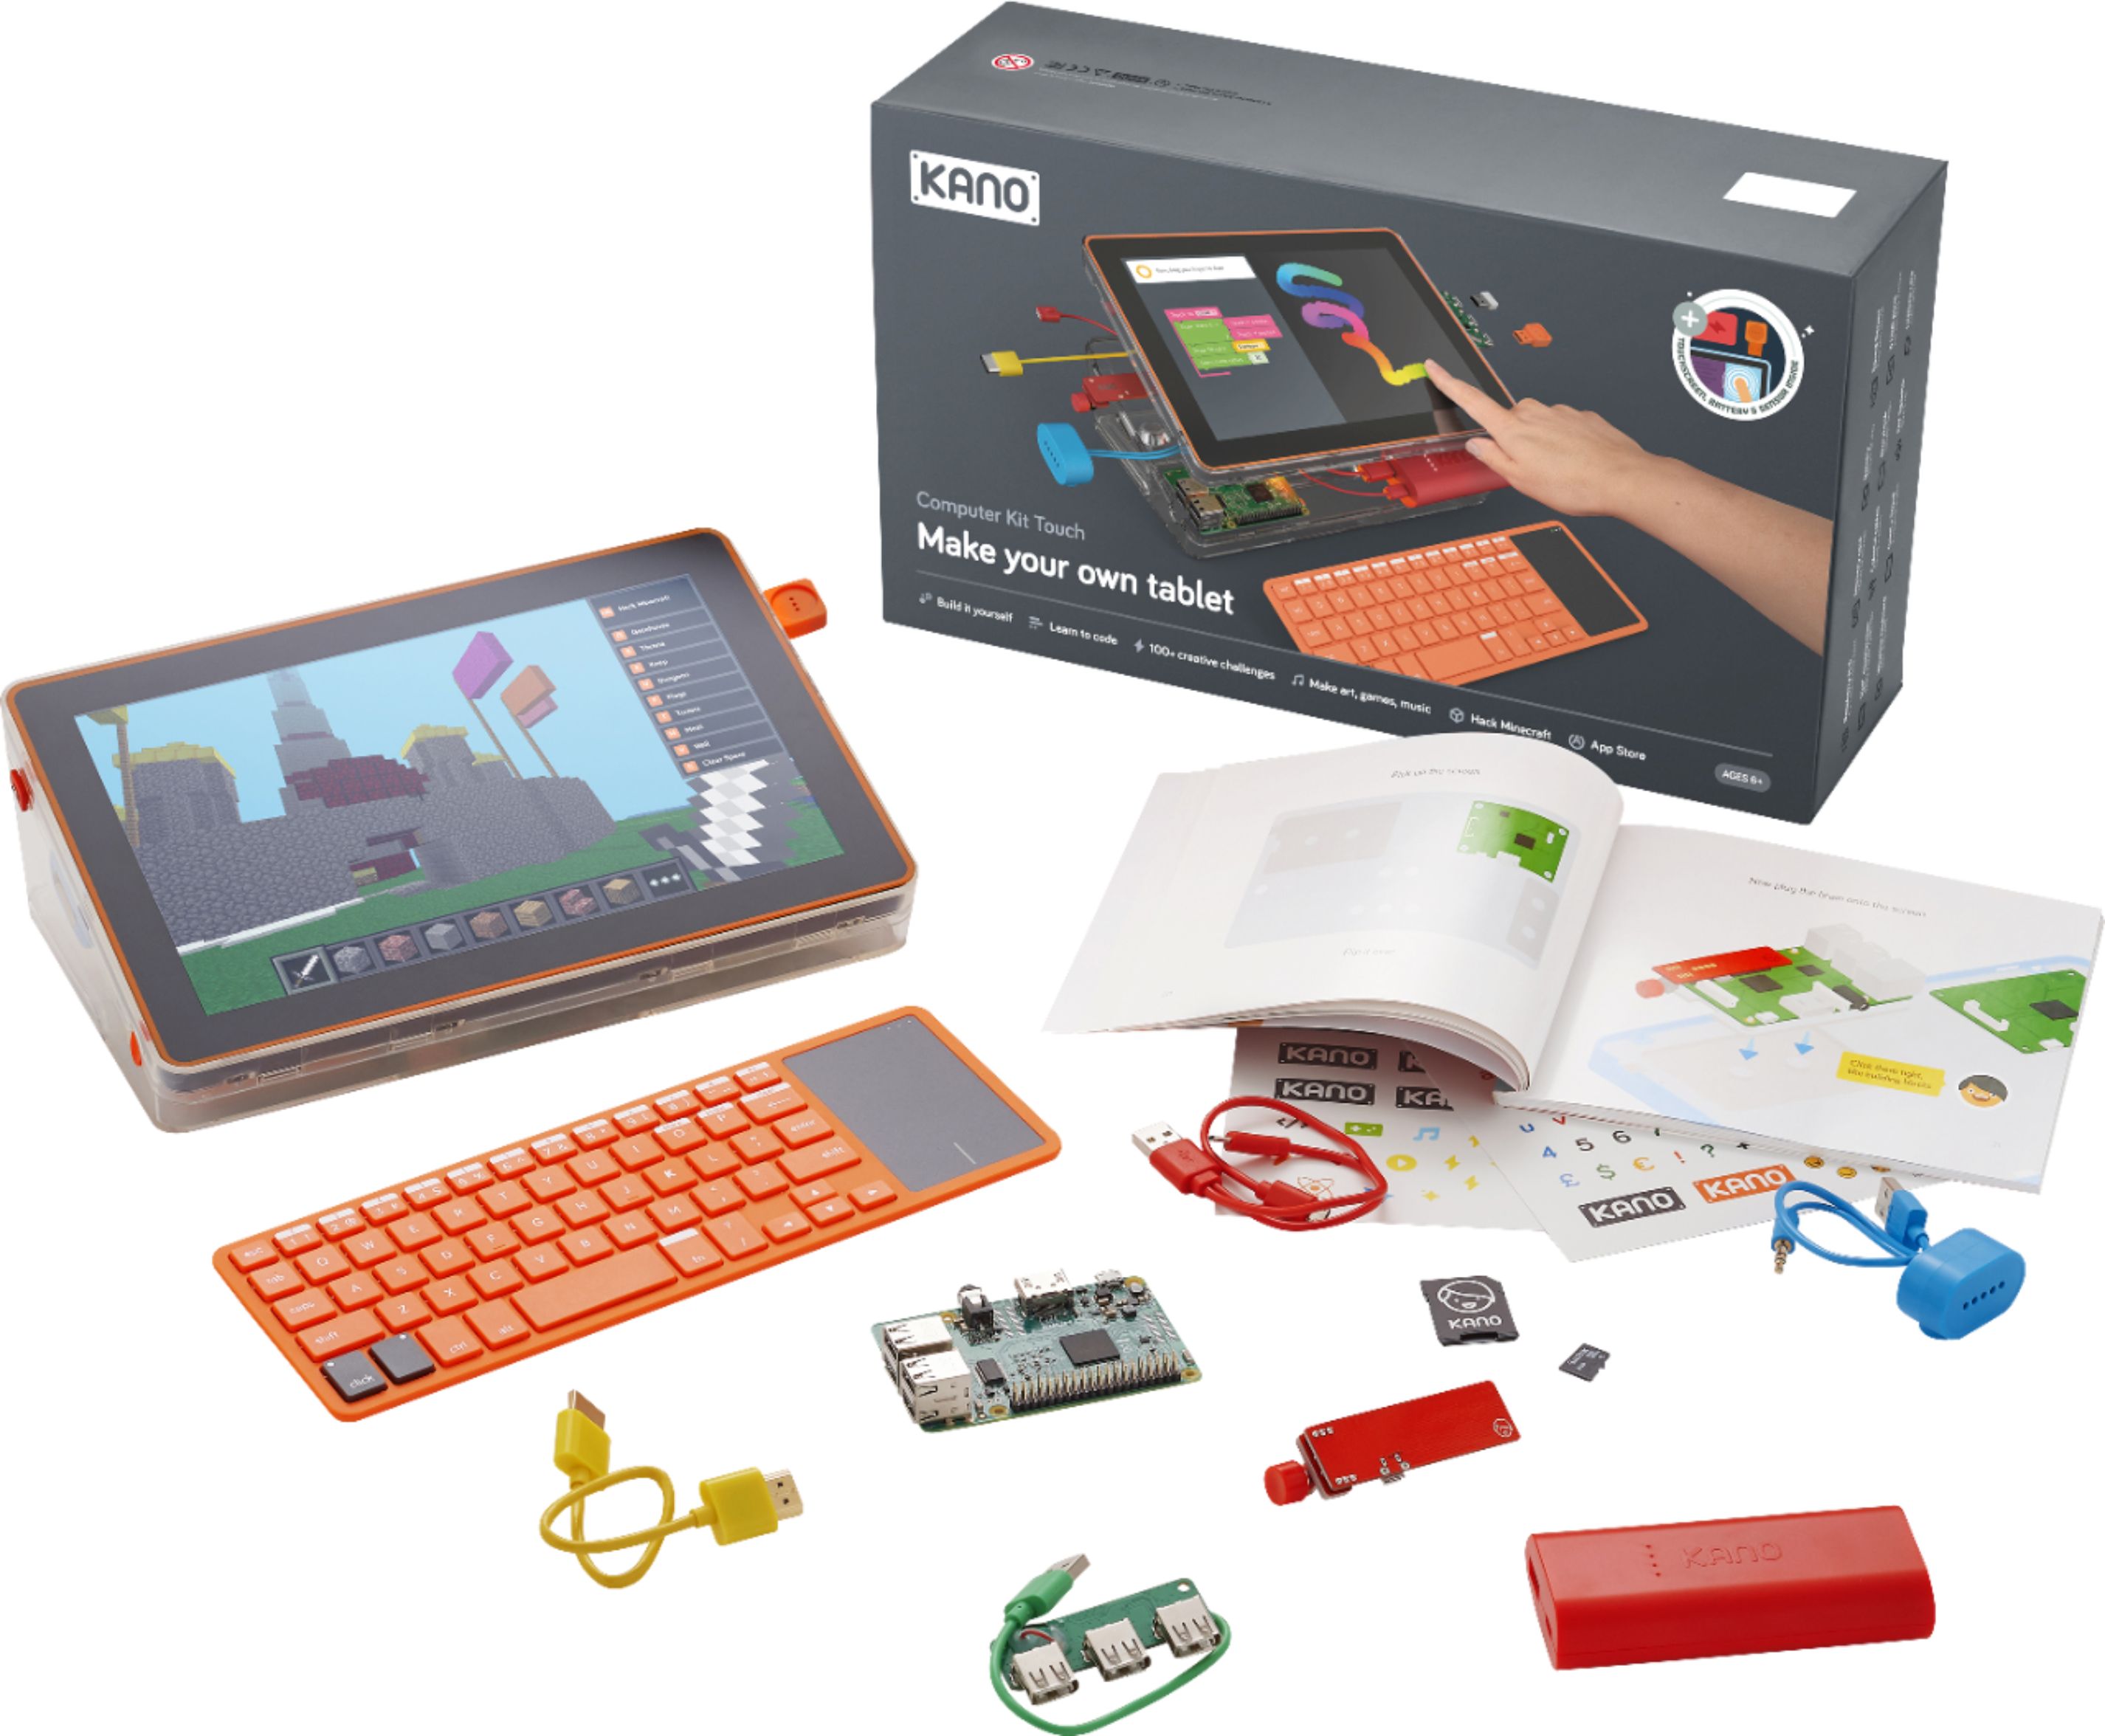 Best Buy: Kano Computer Kit Touch 1010-02